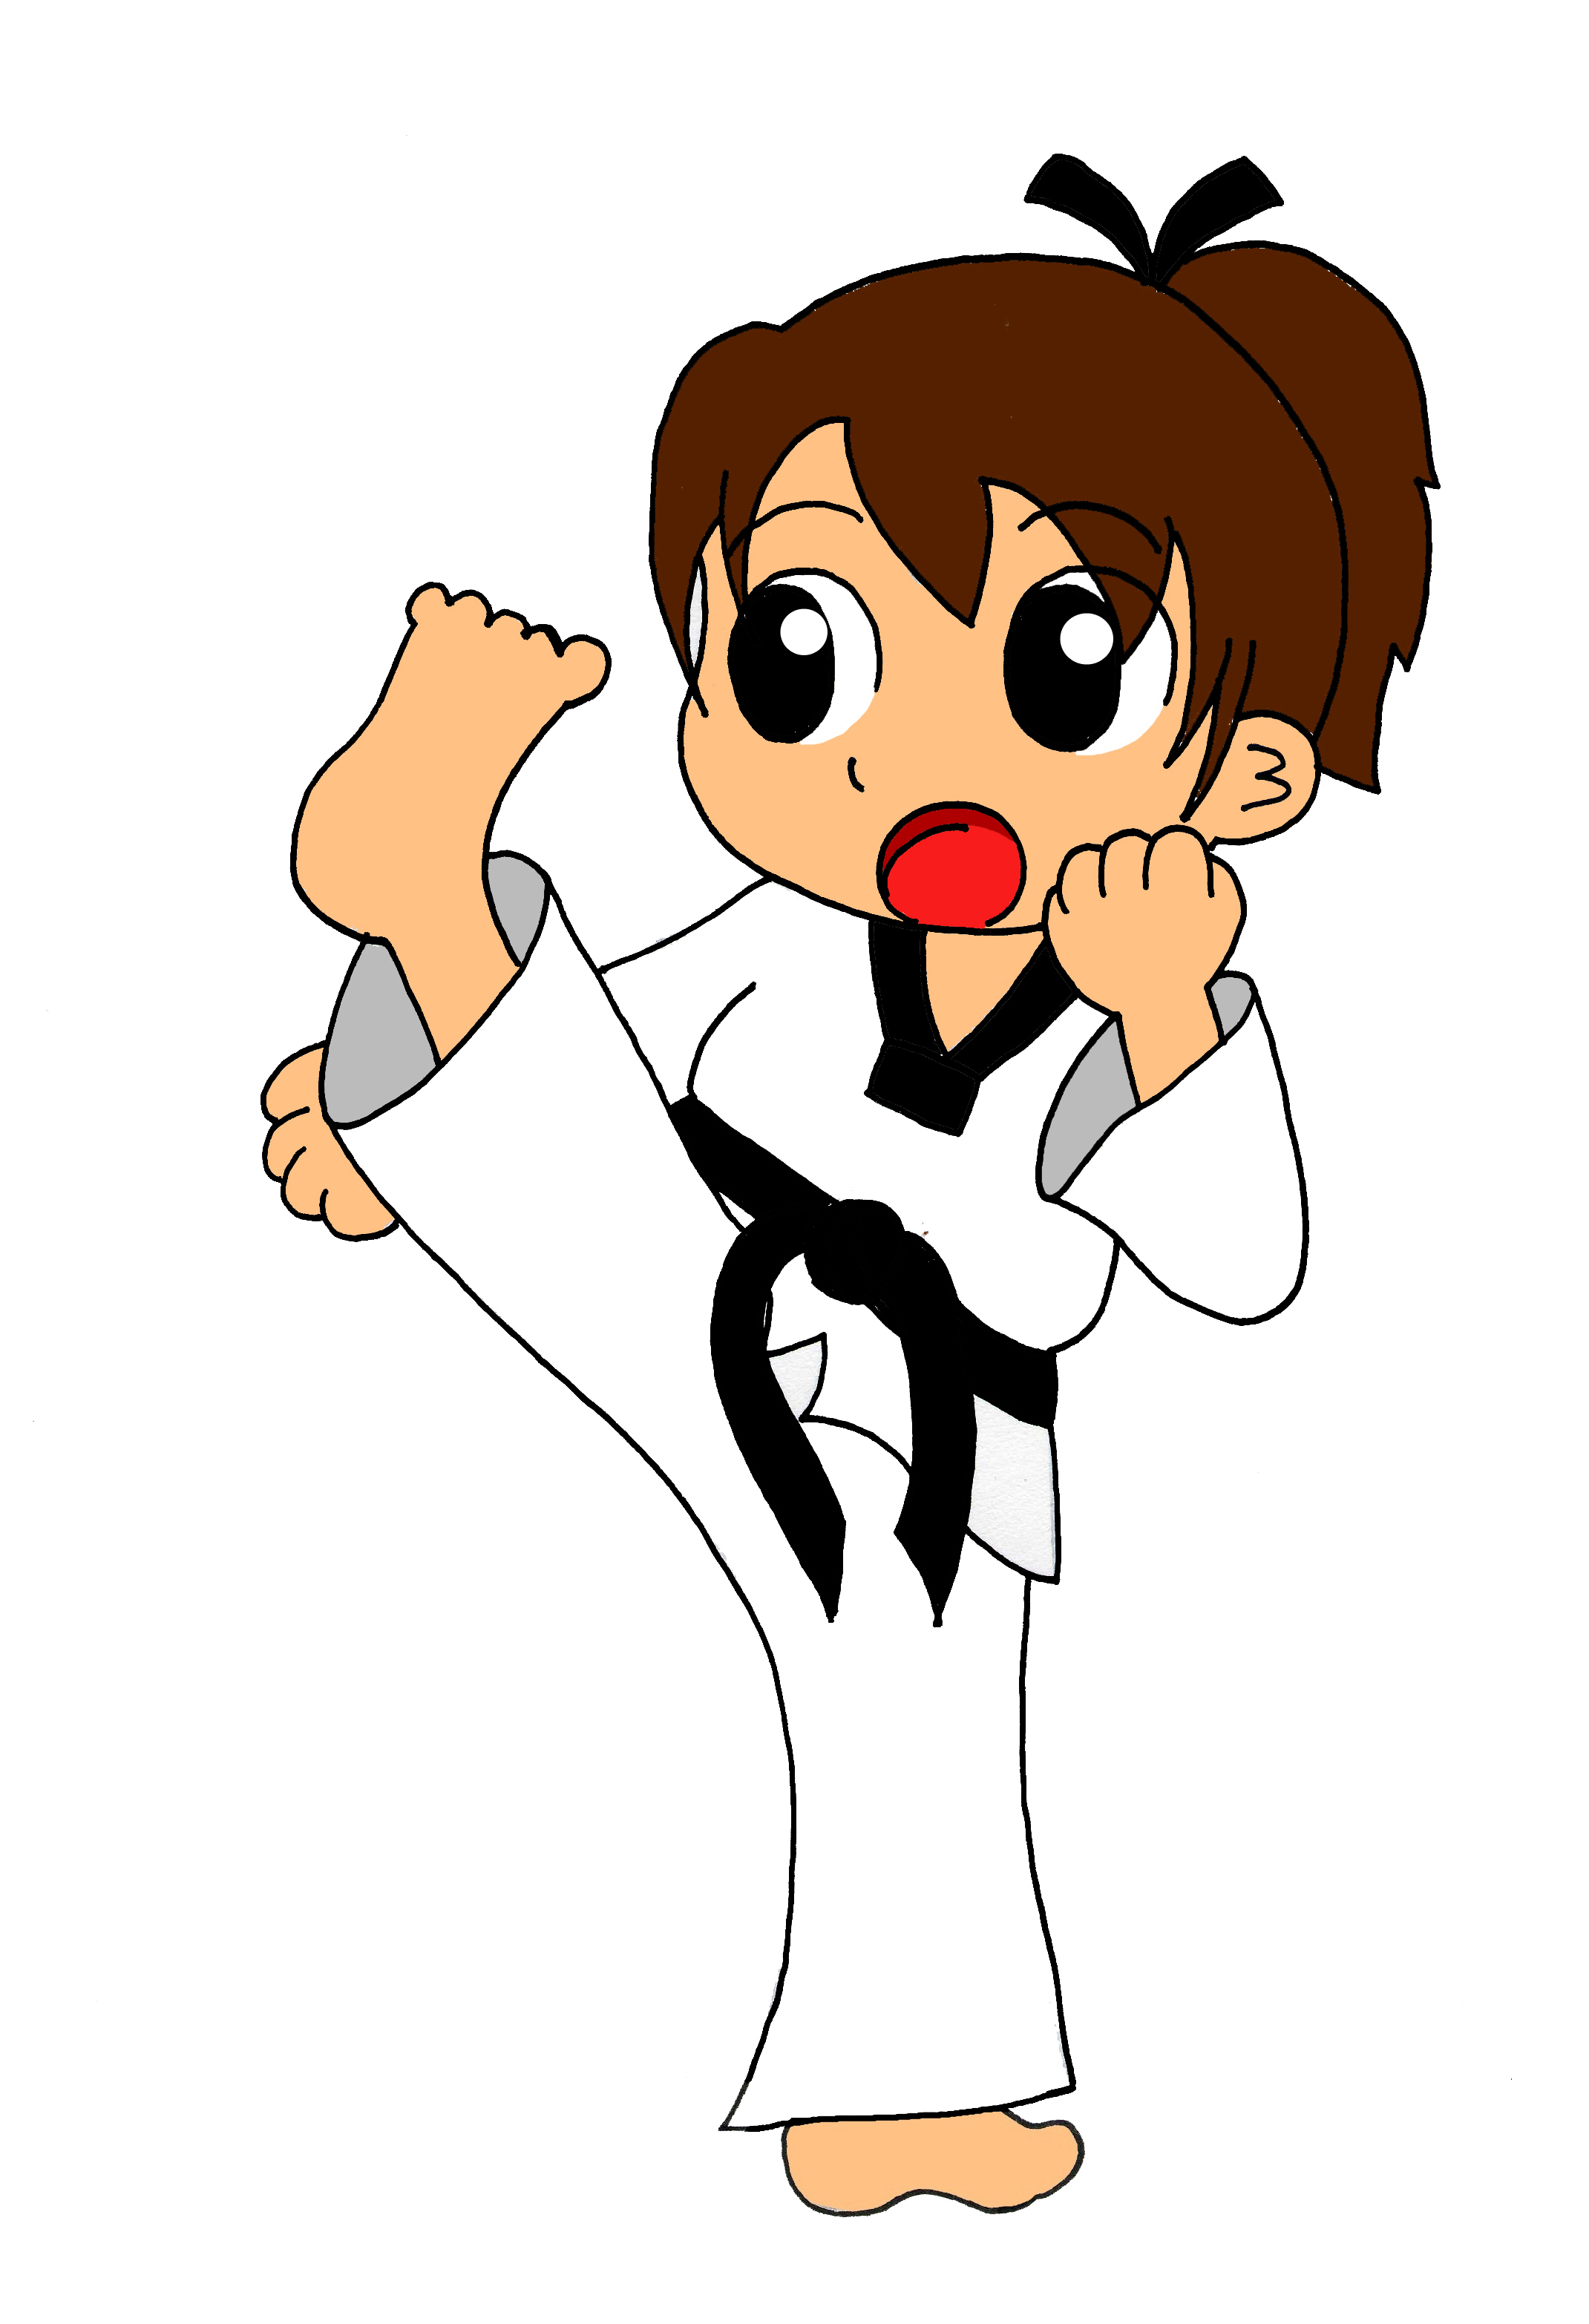 Karate Clip Art Free Download - Free Clipart Images